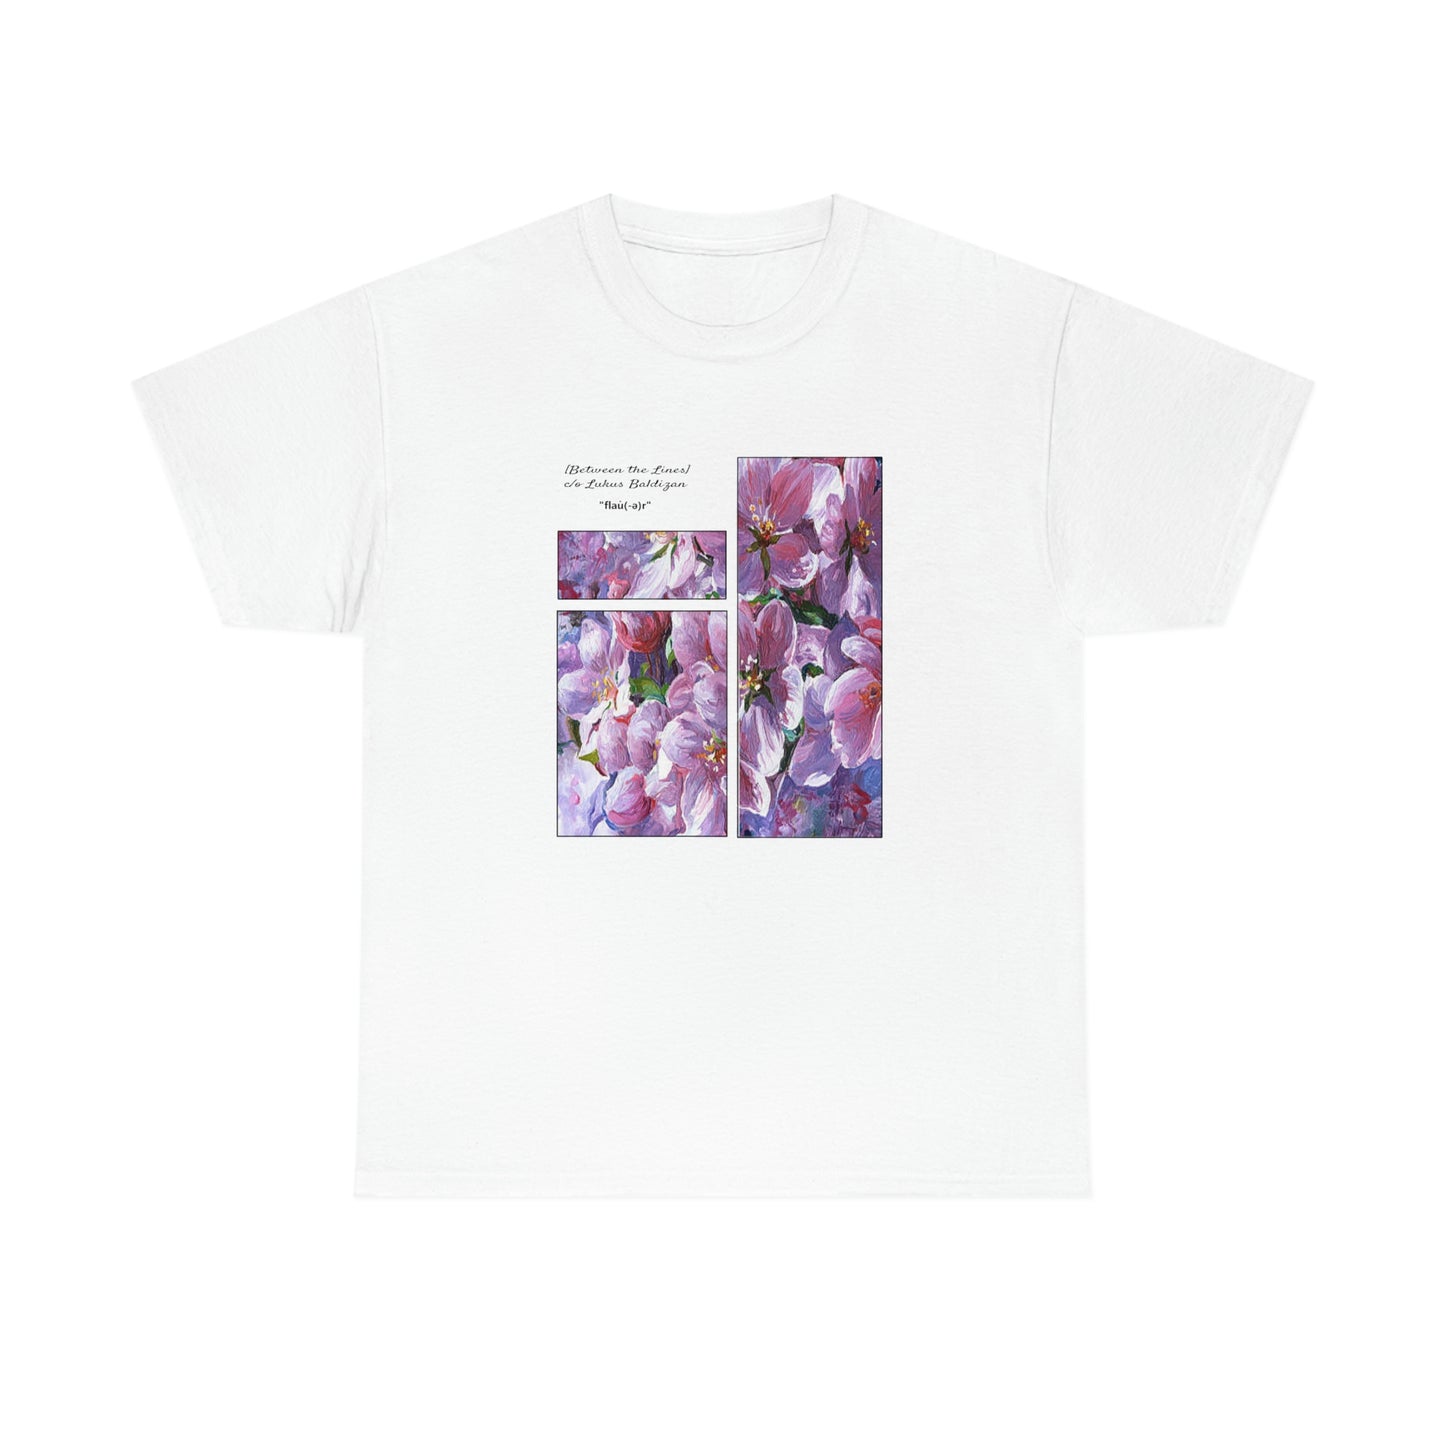 "[Flowers]" Between the Lines T-Shirt